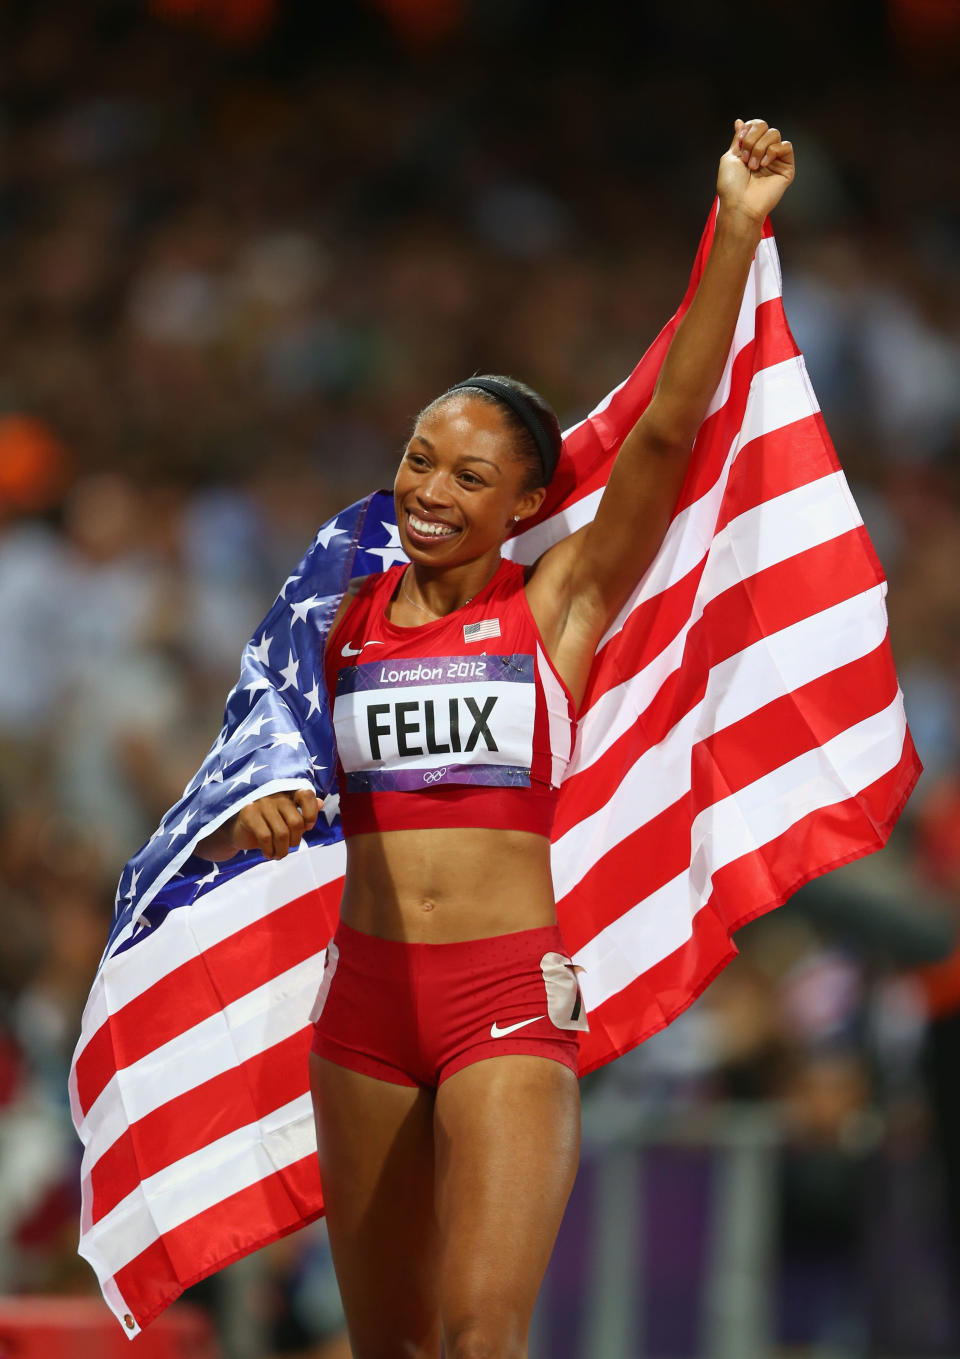 Allyson Felix of the United States celebrates after winning gold in the Women's 200m Final on Day 12 of the London 2012 Olympic Games at Olympic Stadium on August 8, 2012 in London, England. (Photo by Michael Steele/Getty Images)